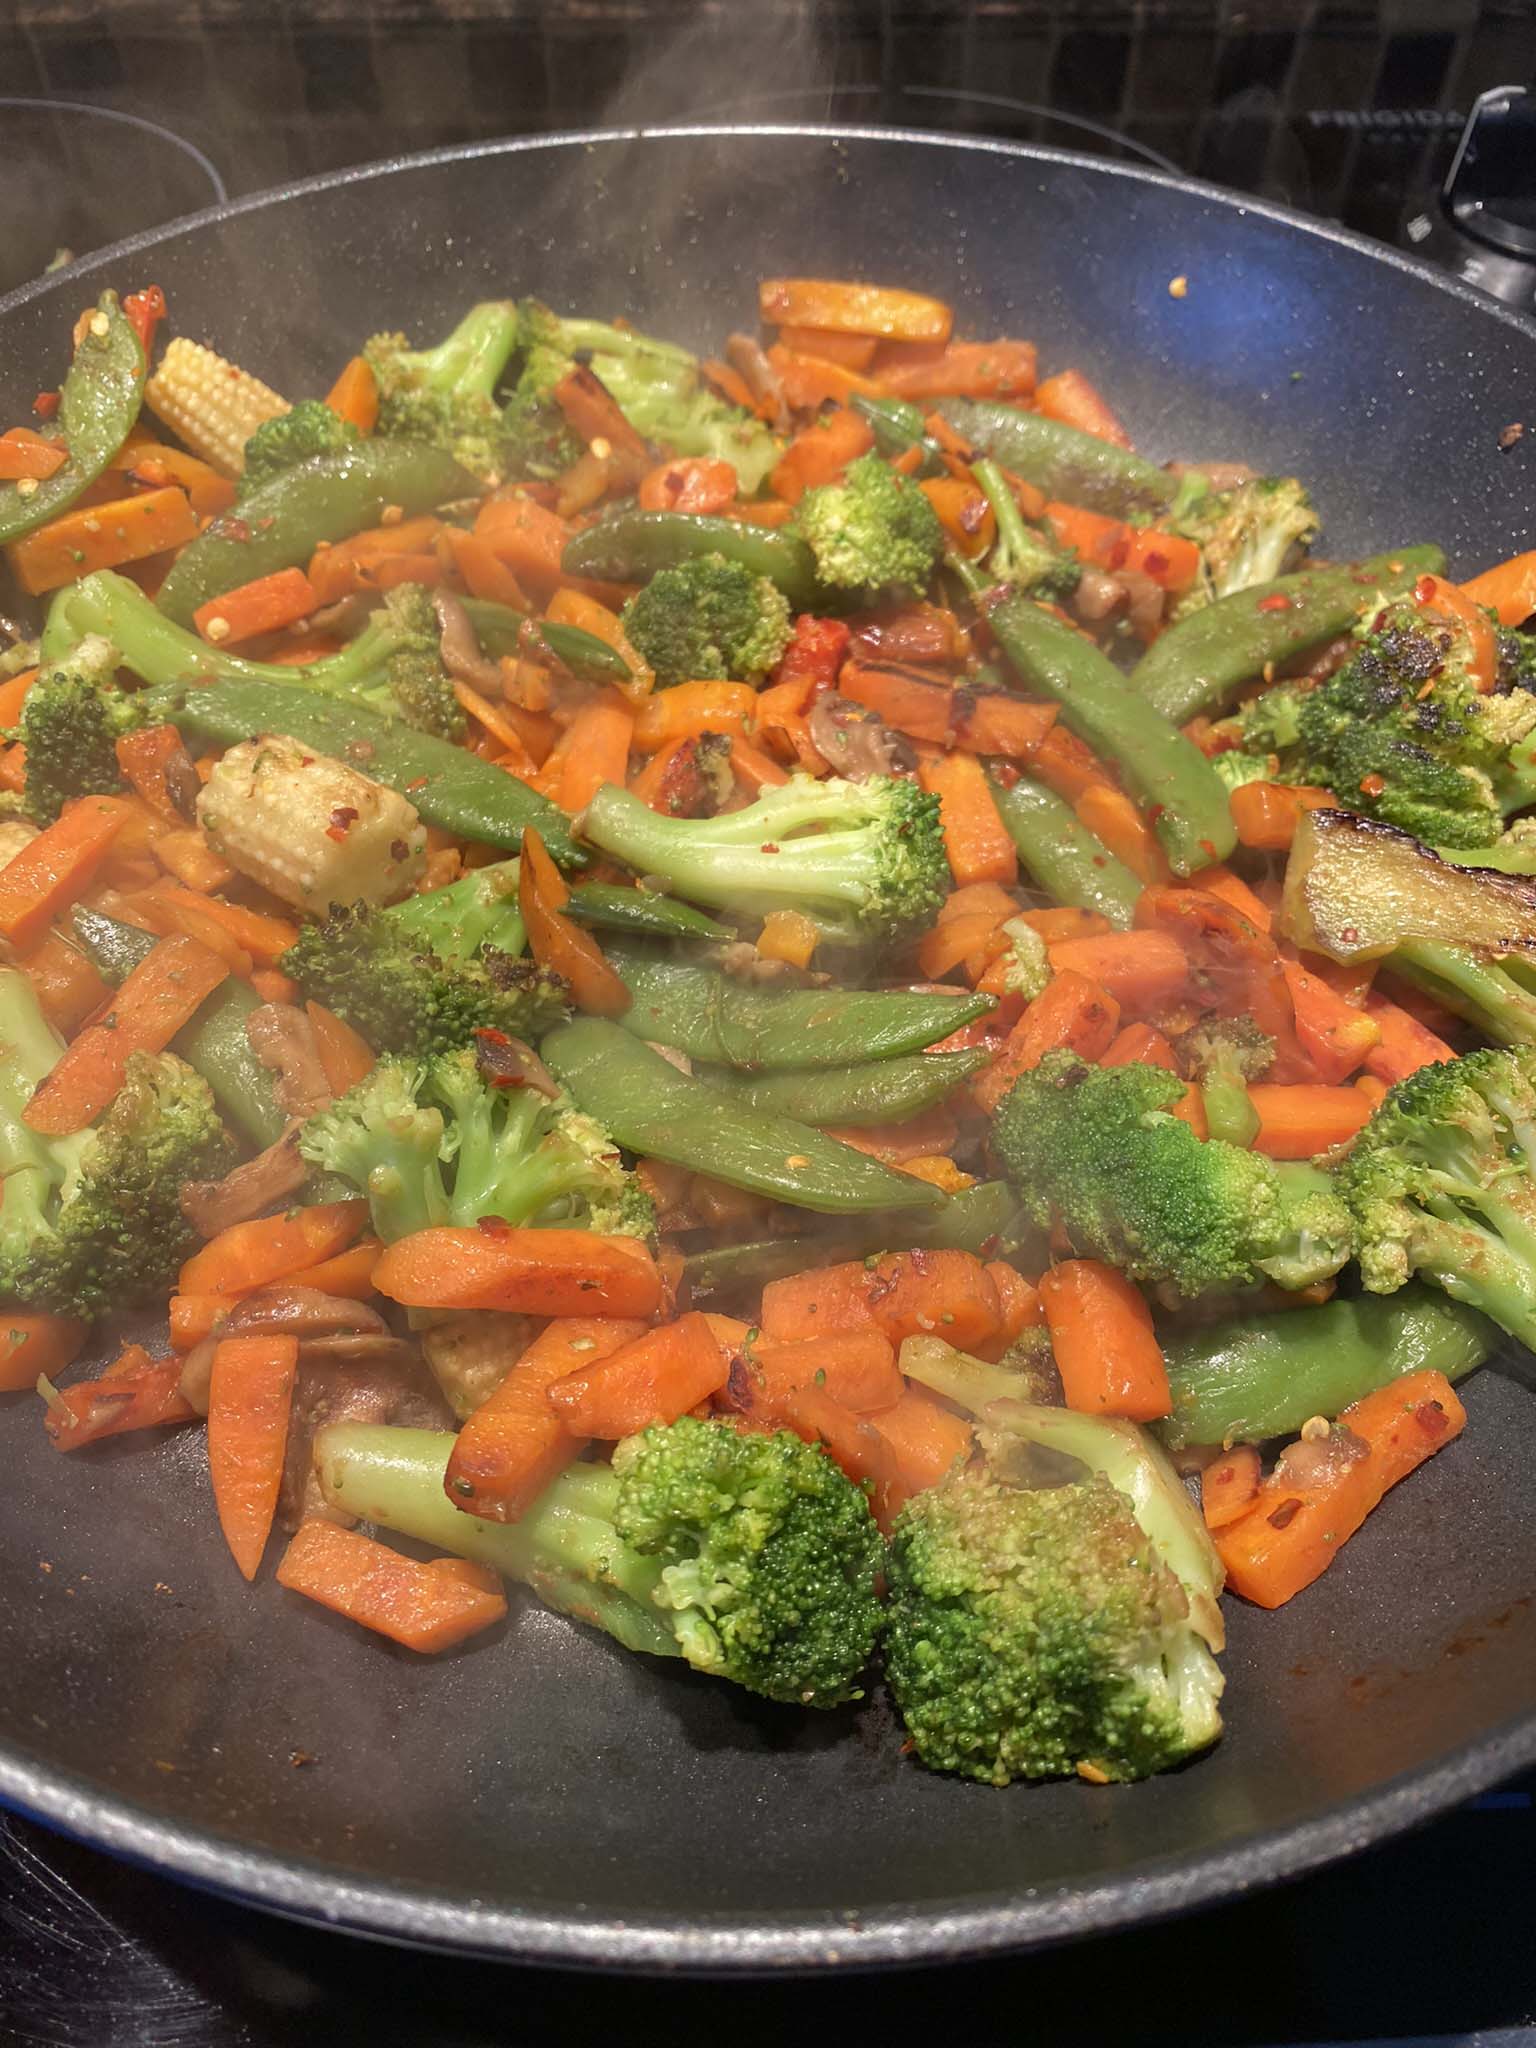 Sauteed vegetables in a pan.